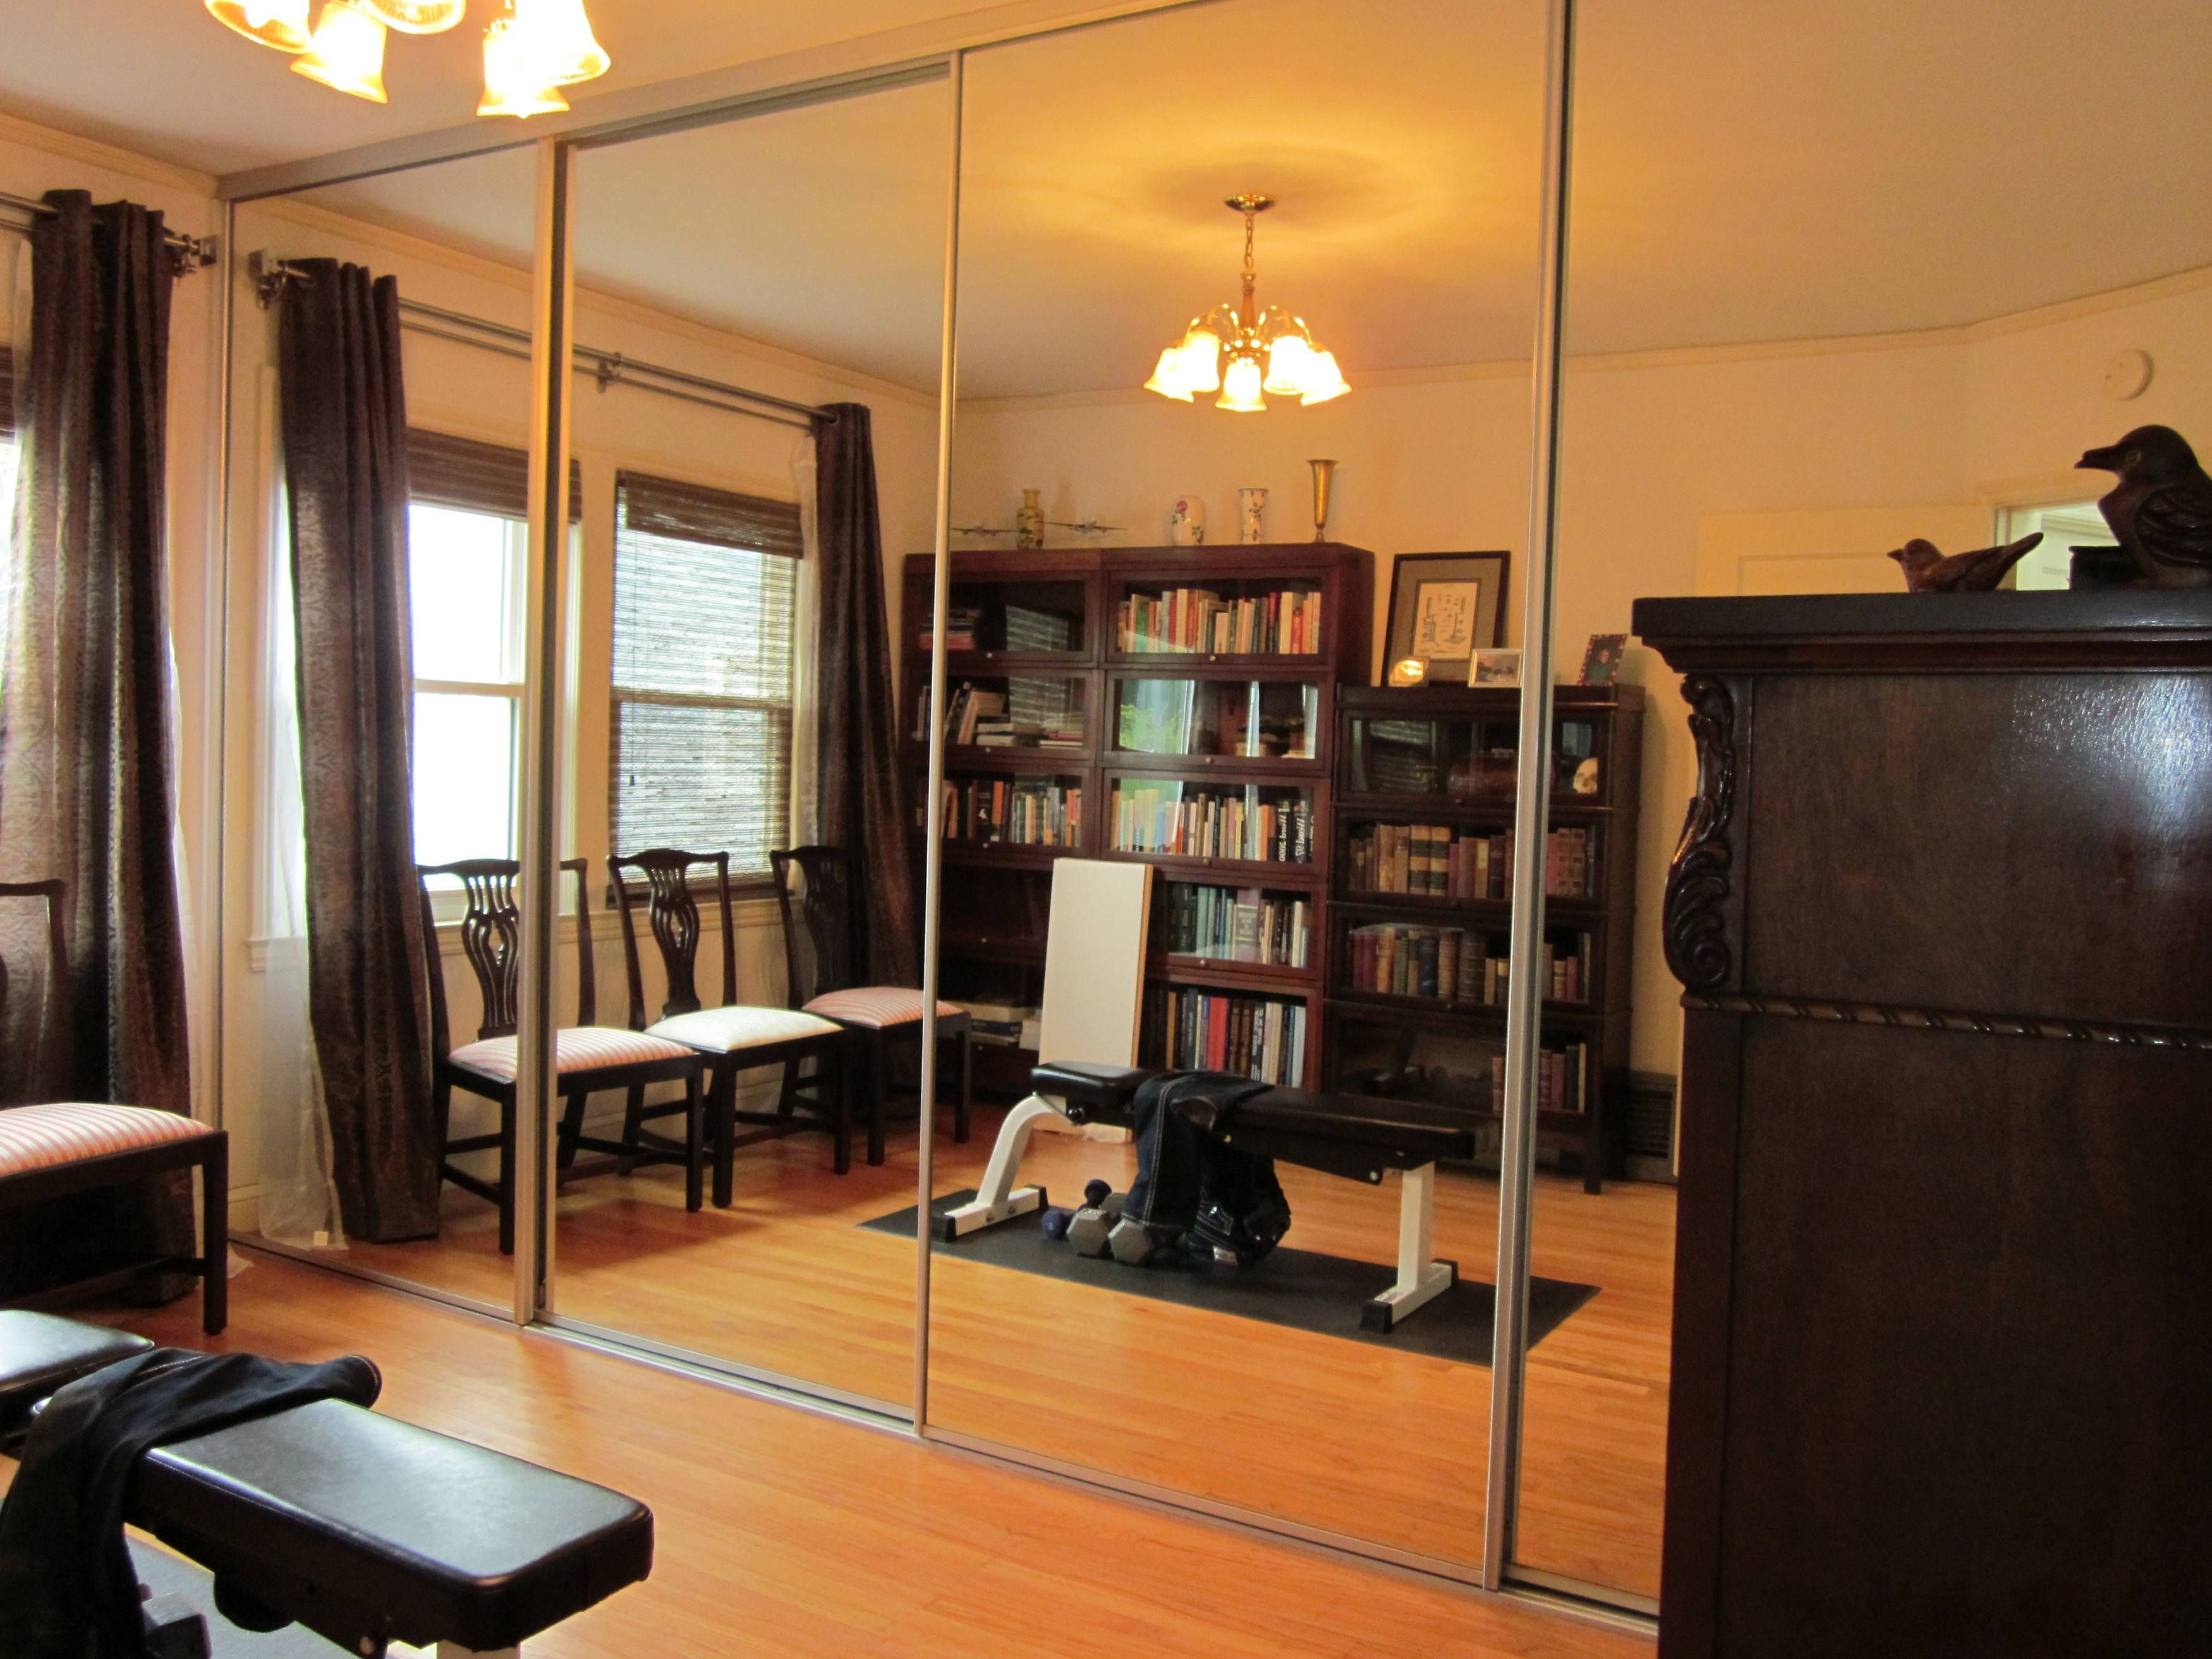 Living Room With Floor To Ceiling Mirror (View 12 of 25)